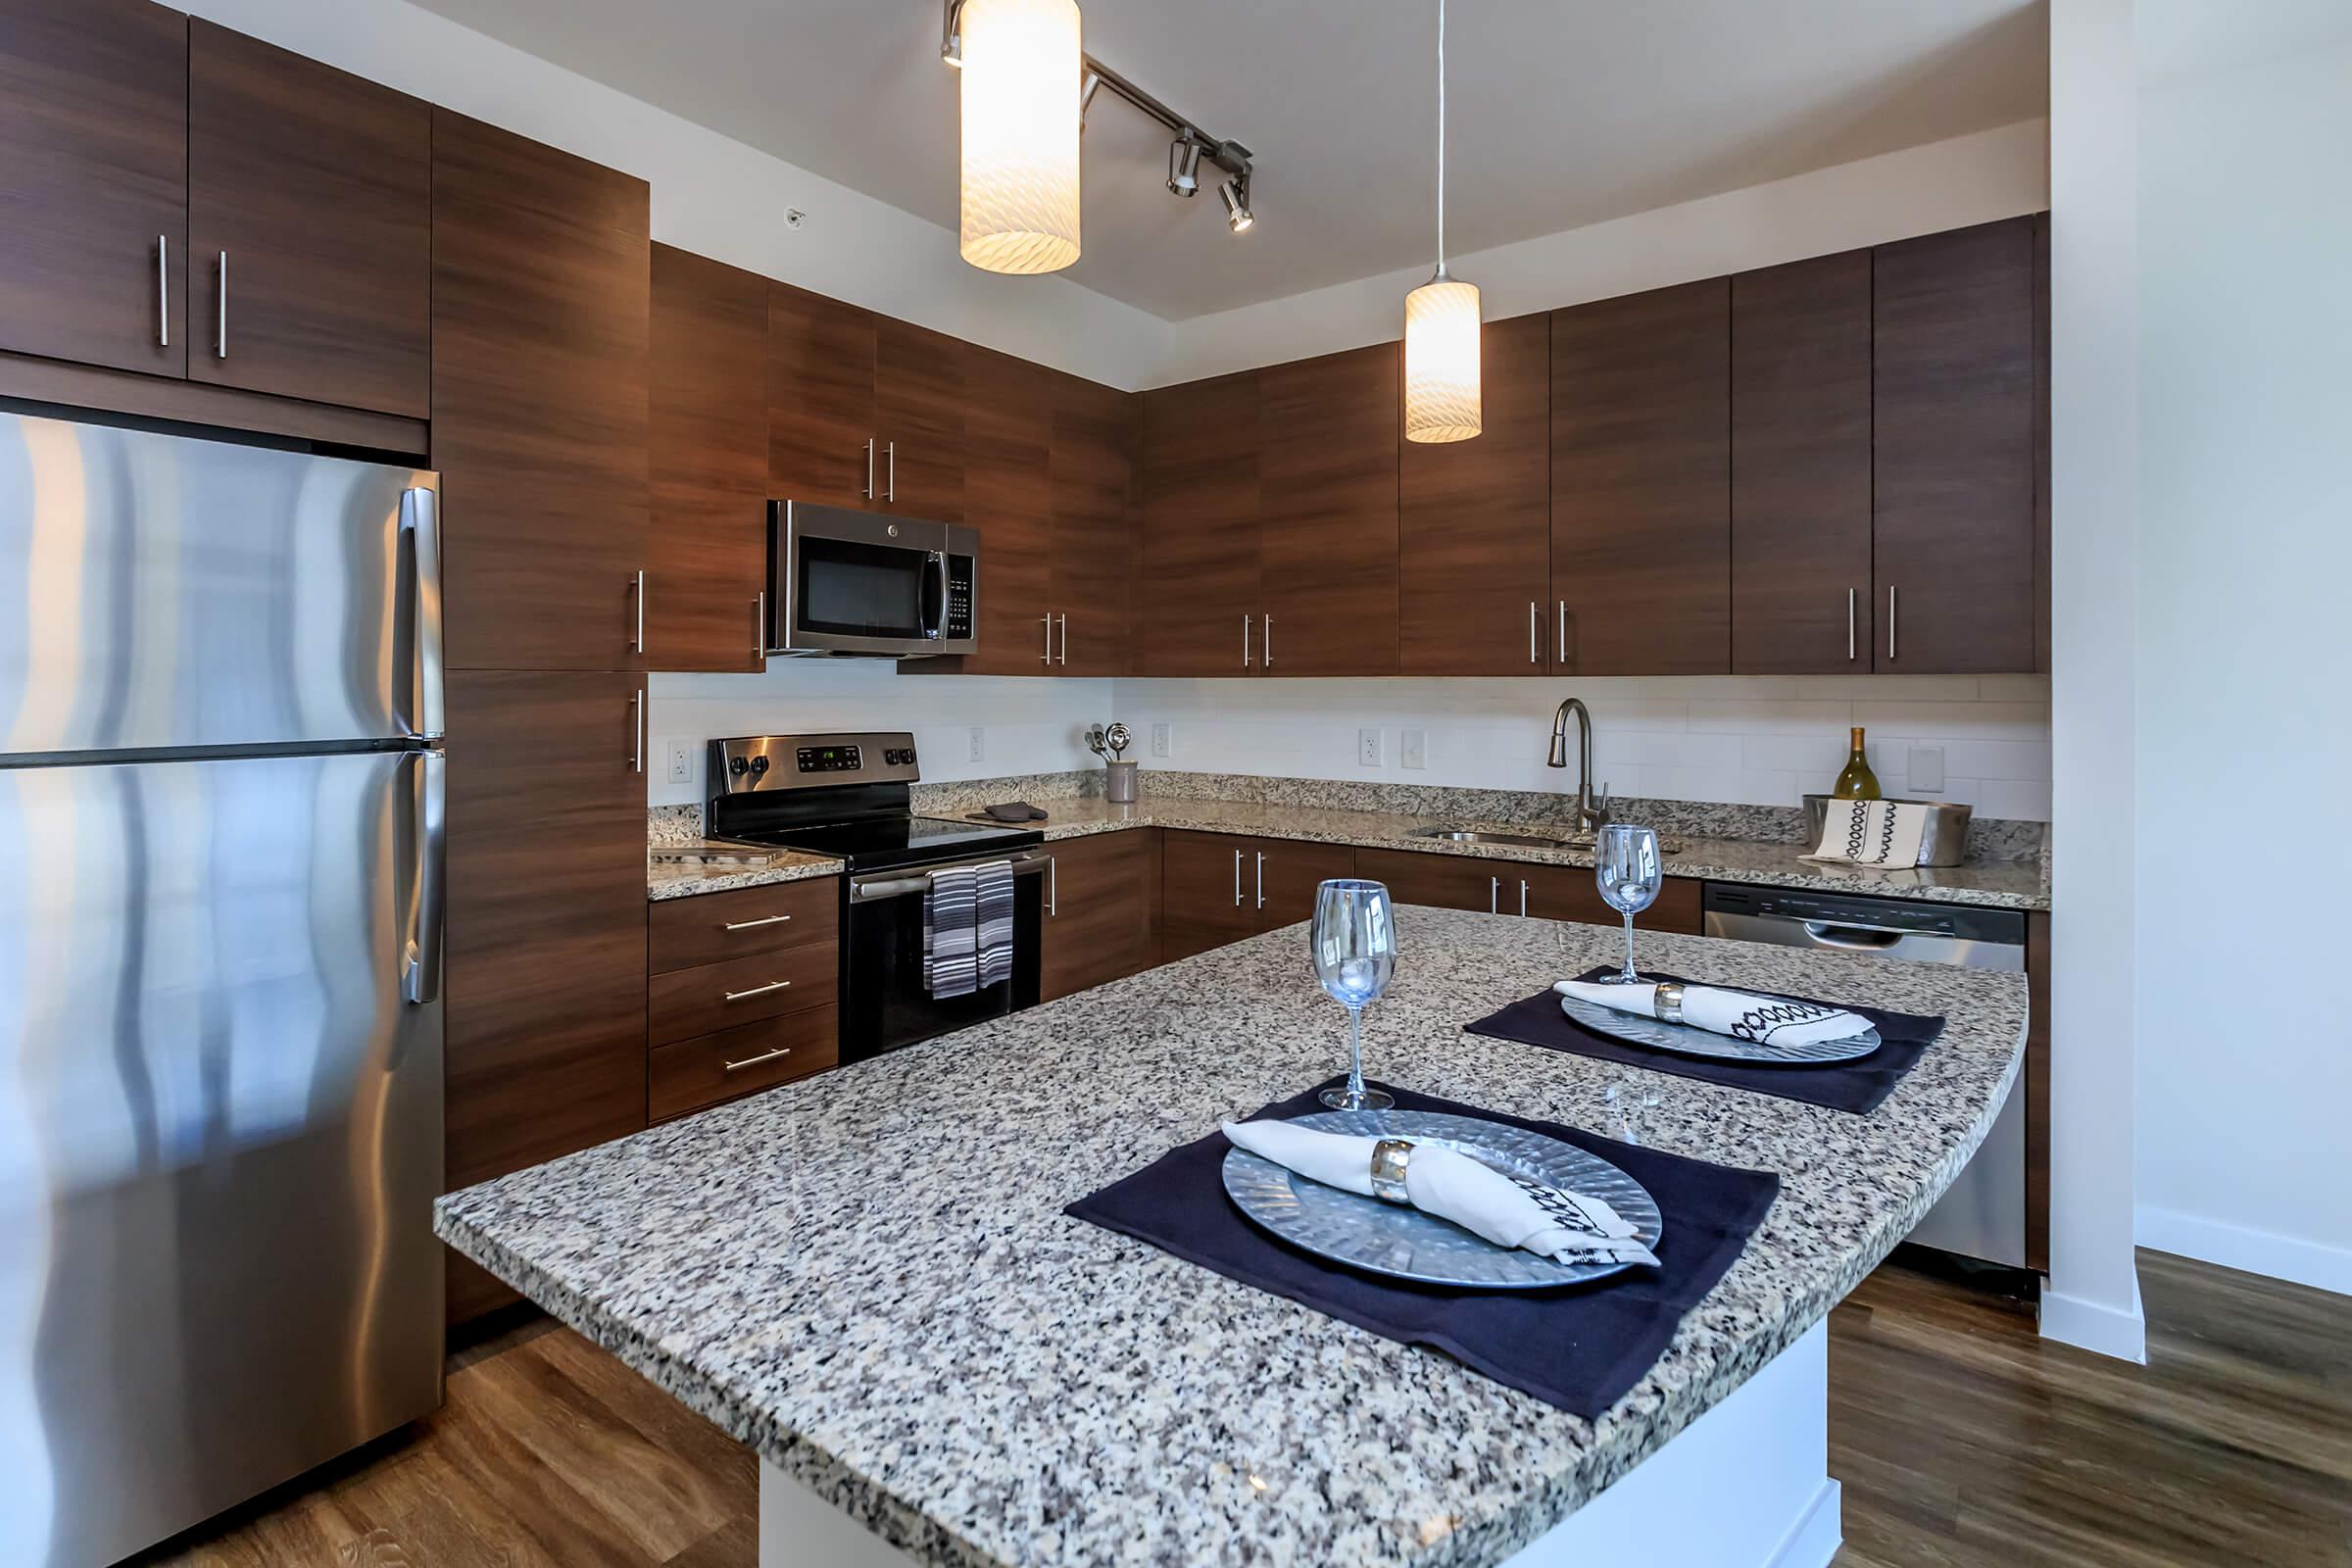 an island in the middle of a kitchen counter